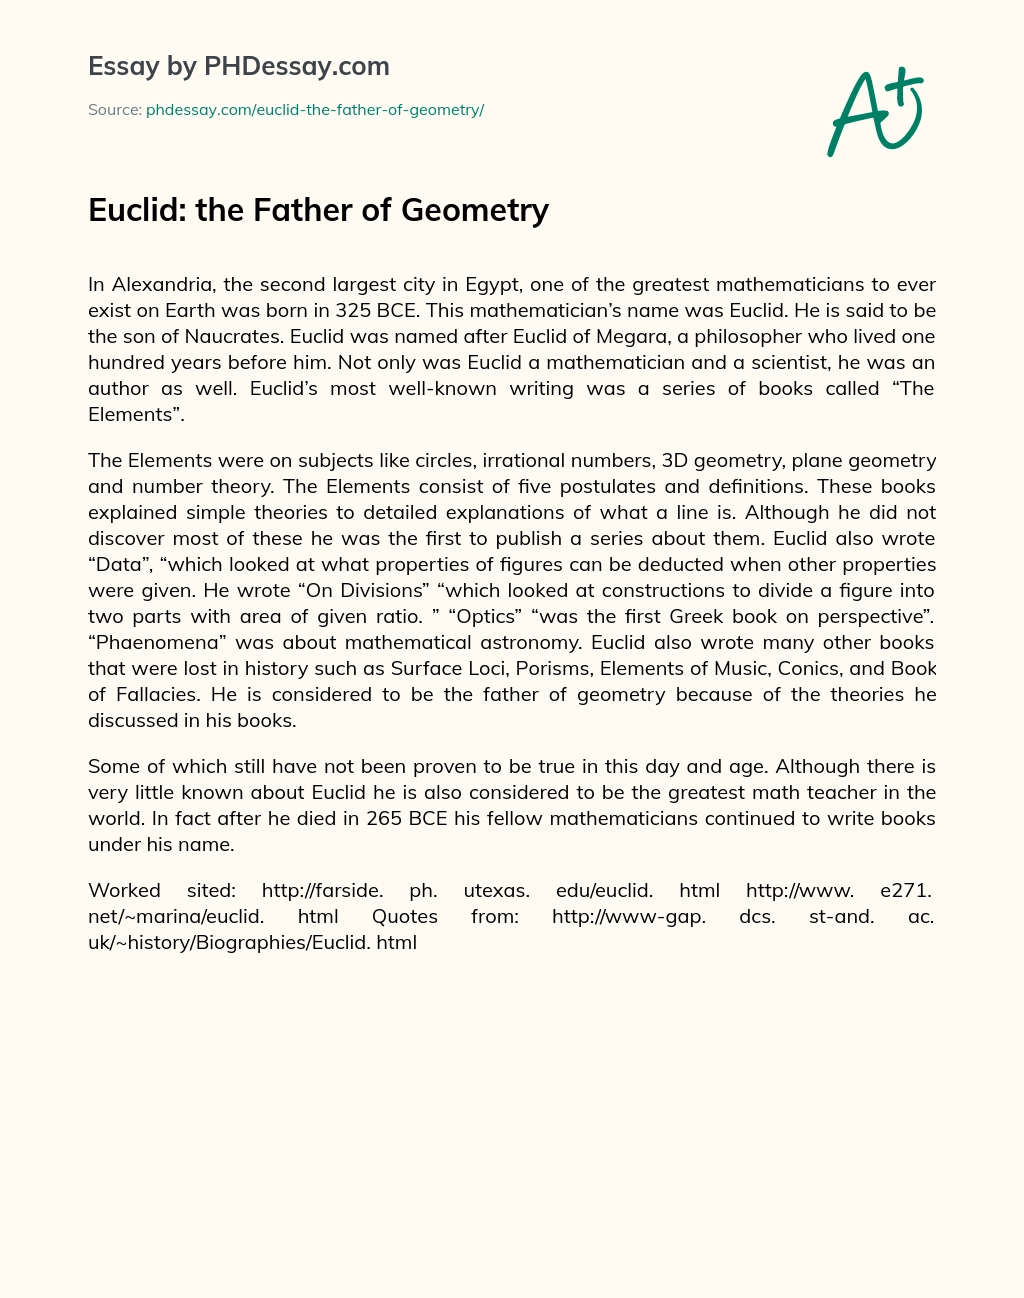 Euclid: the Father of Geometry essay